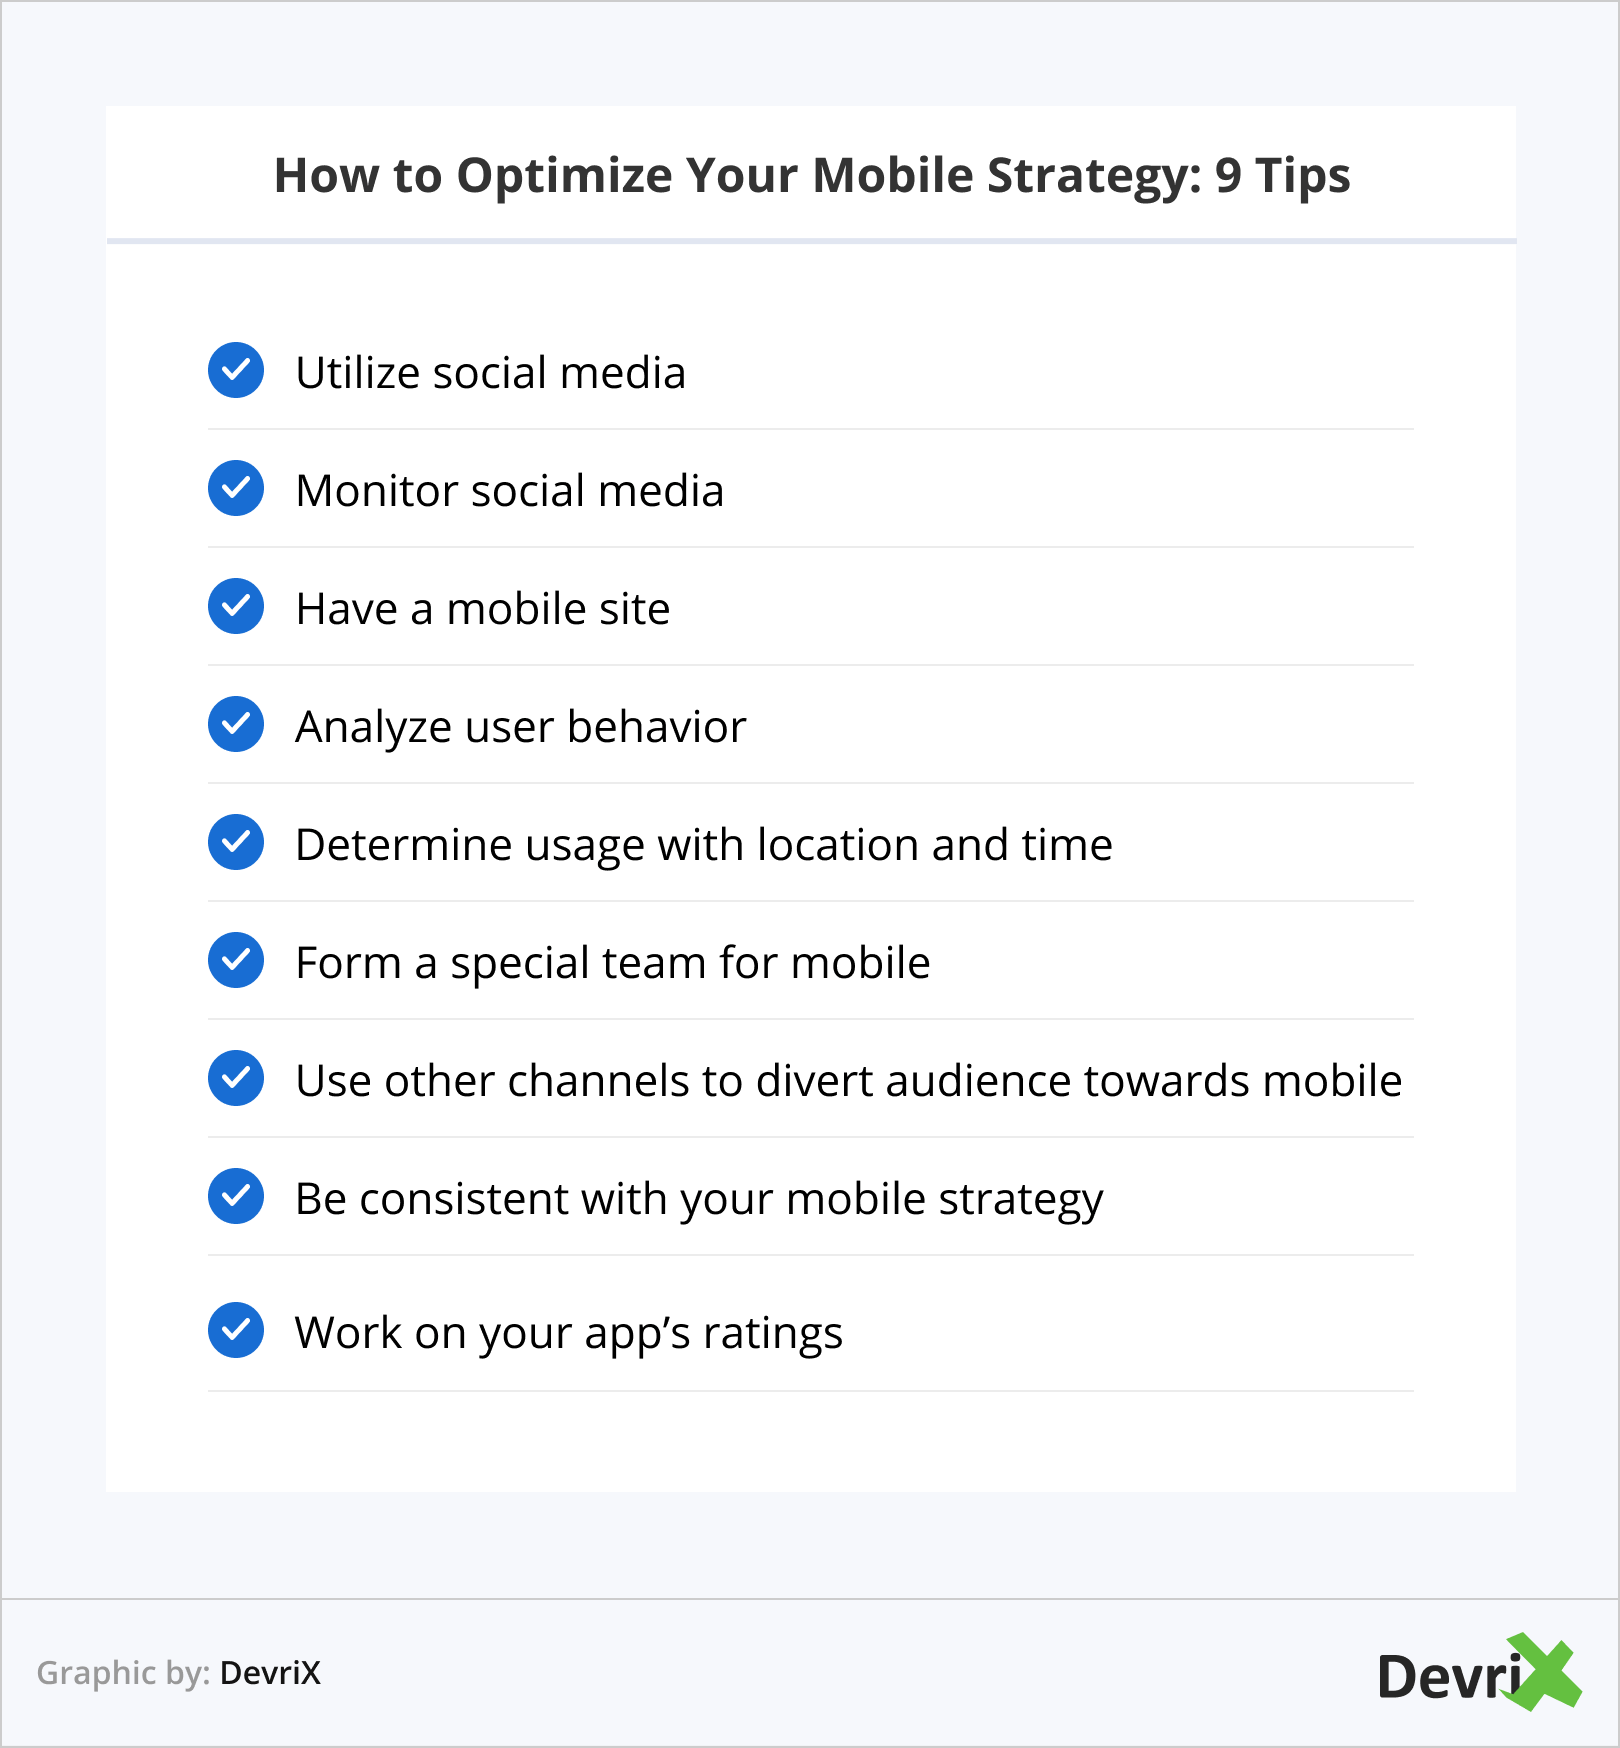 How to Optimize Your Mobile Strategy 9 Tips